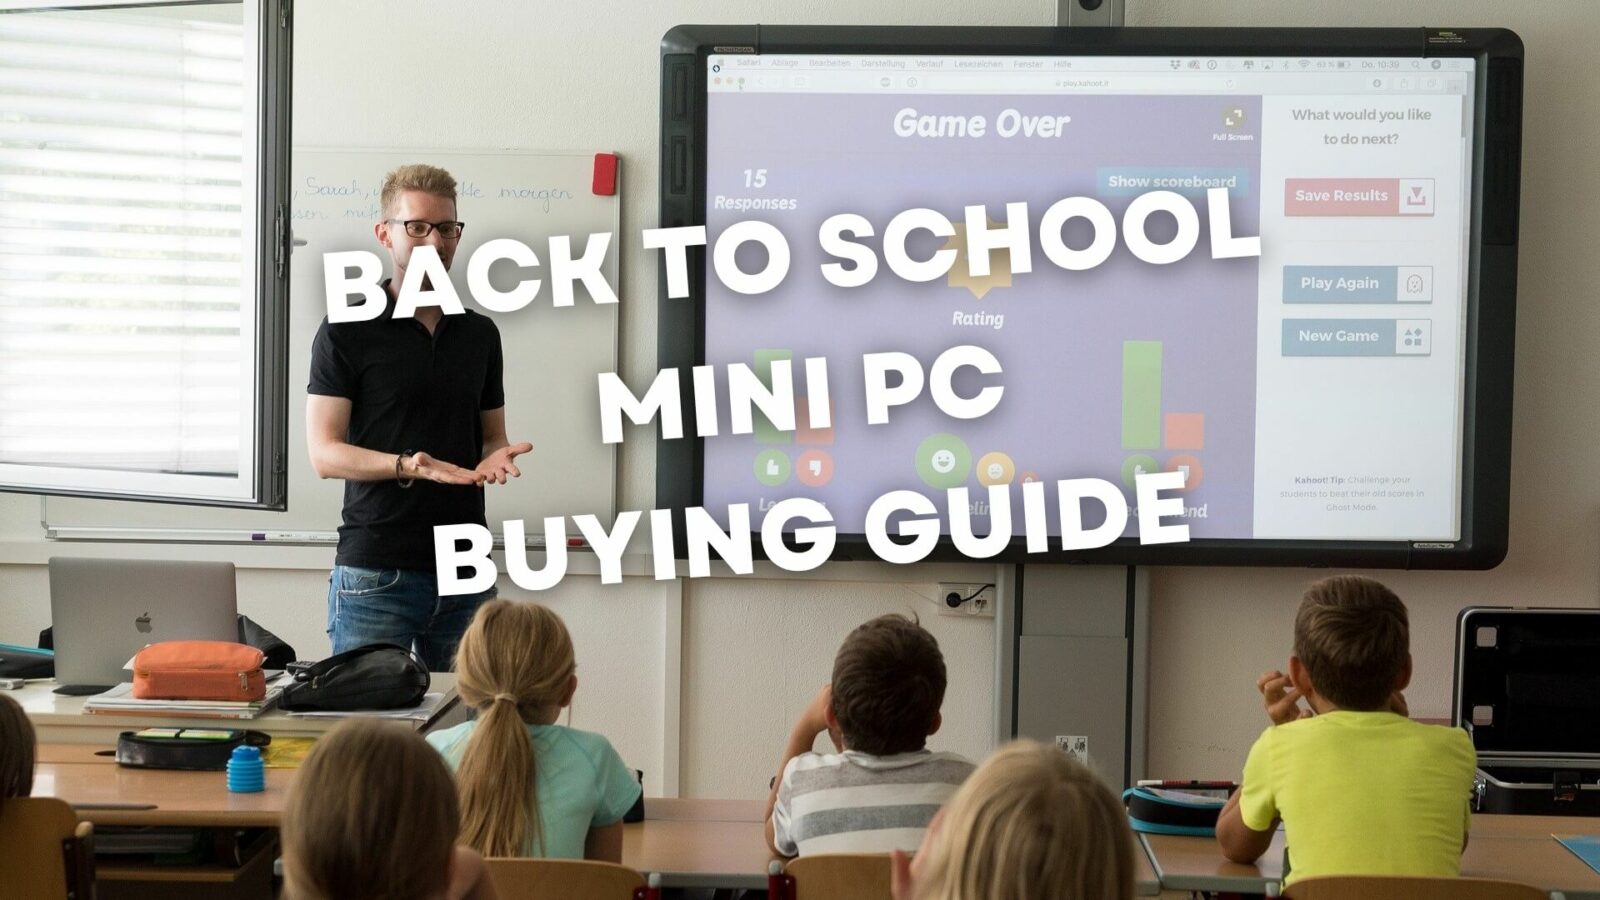 Back to school mini PC buying guide